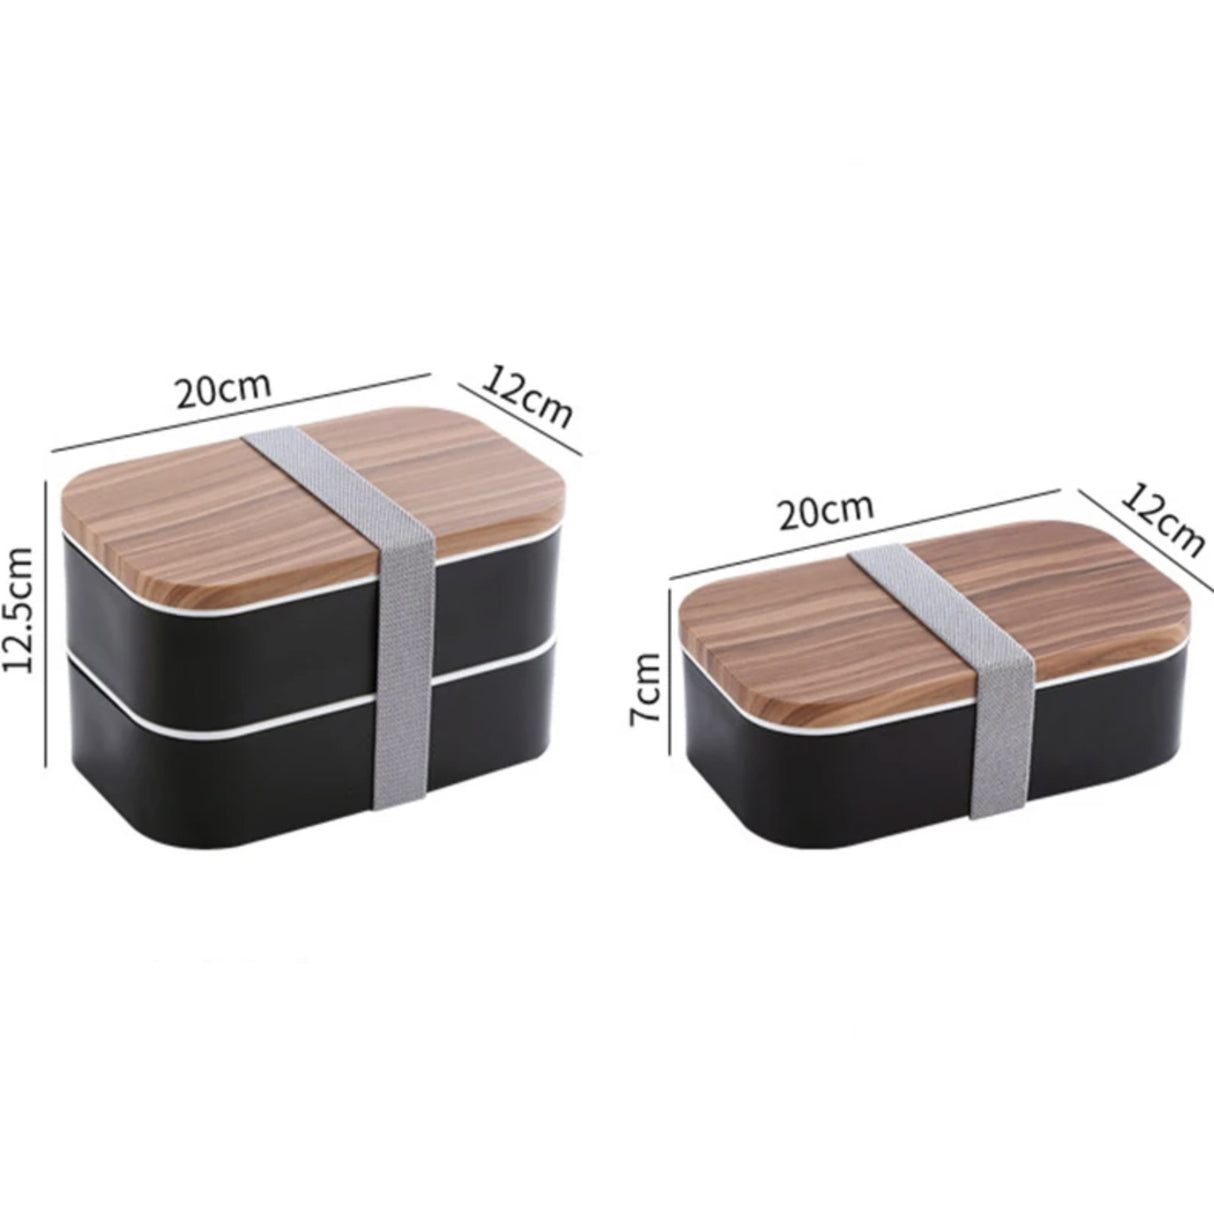 Japanese bento box with cutlery